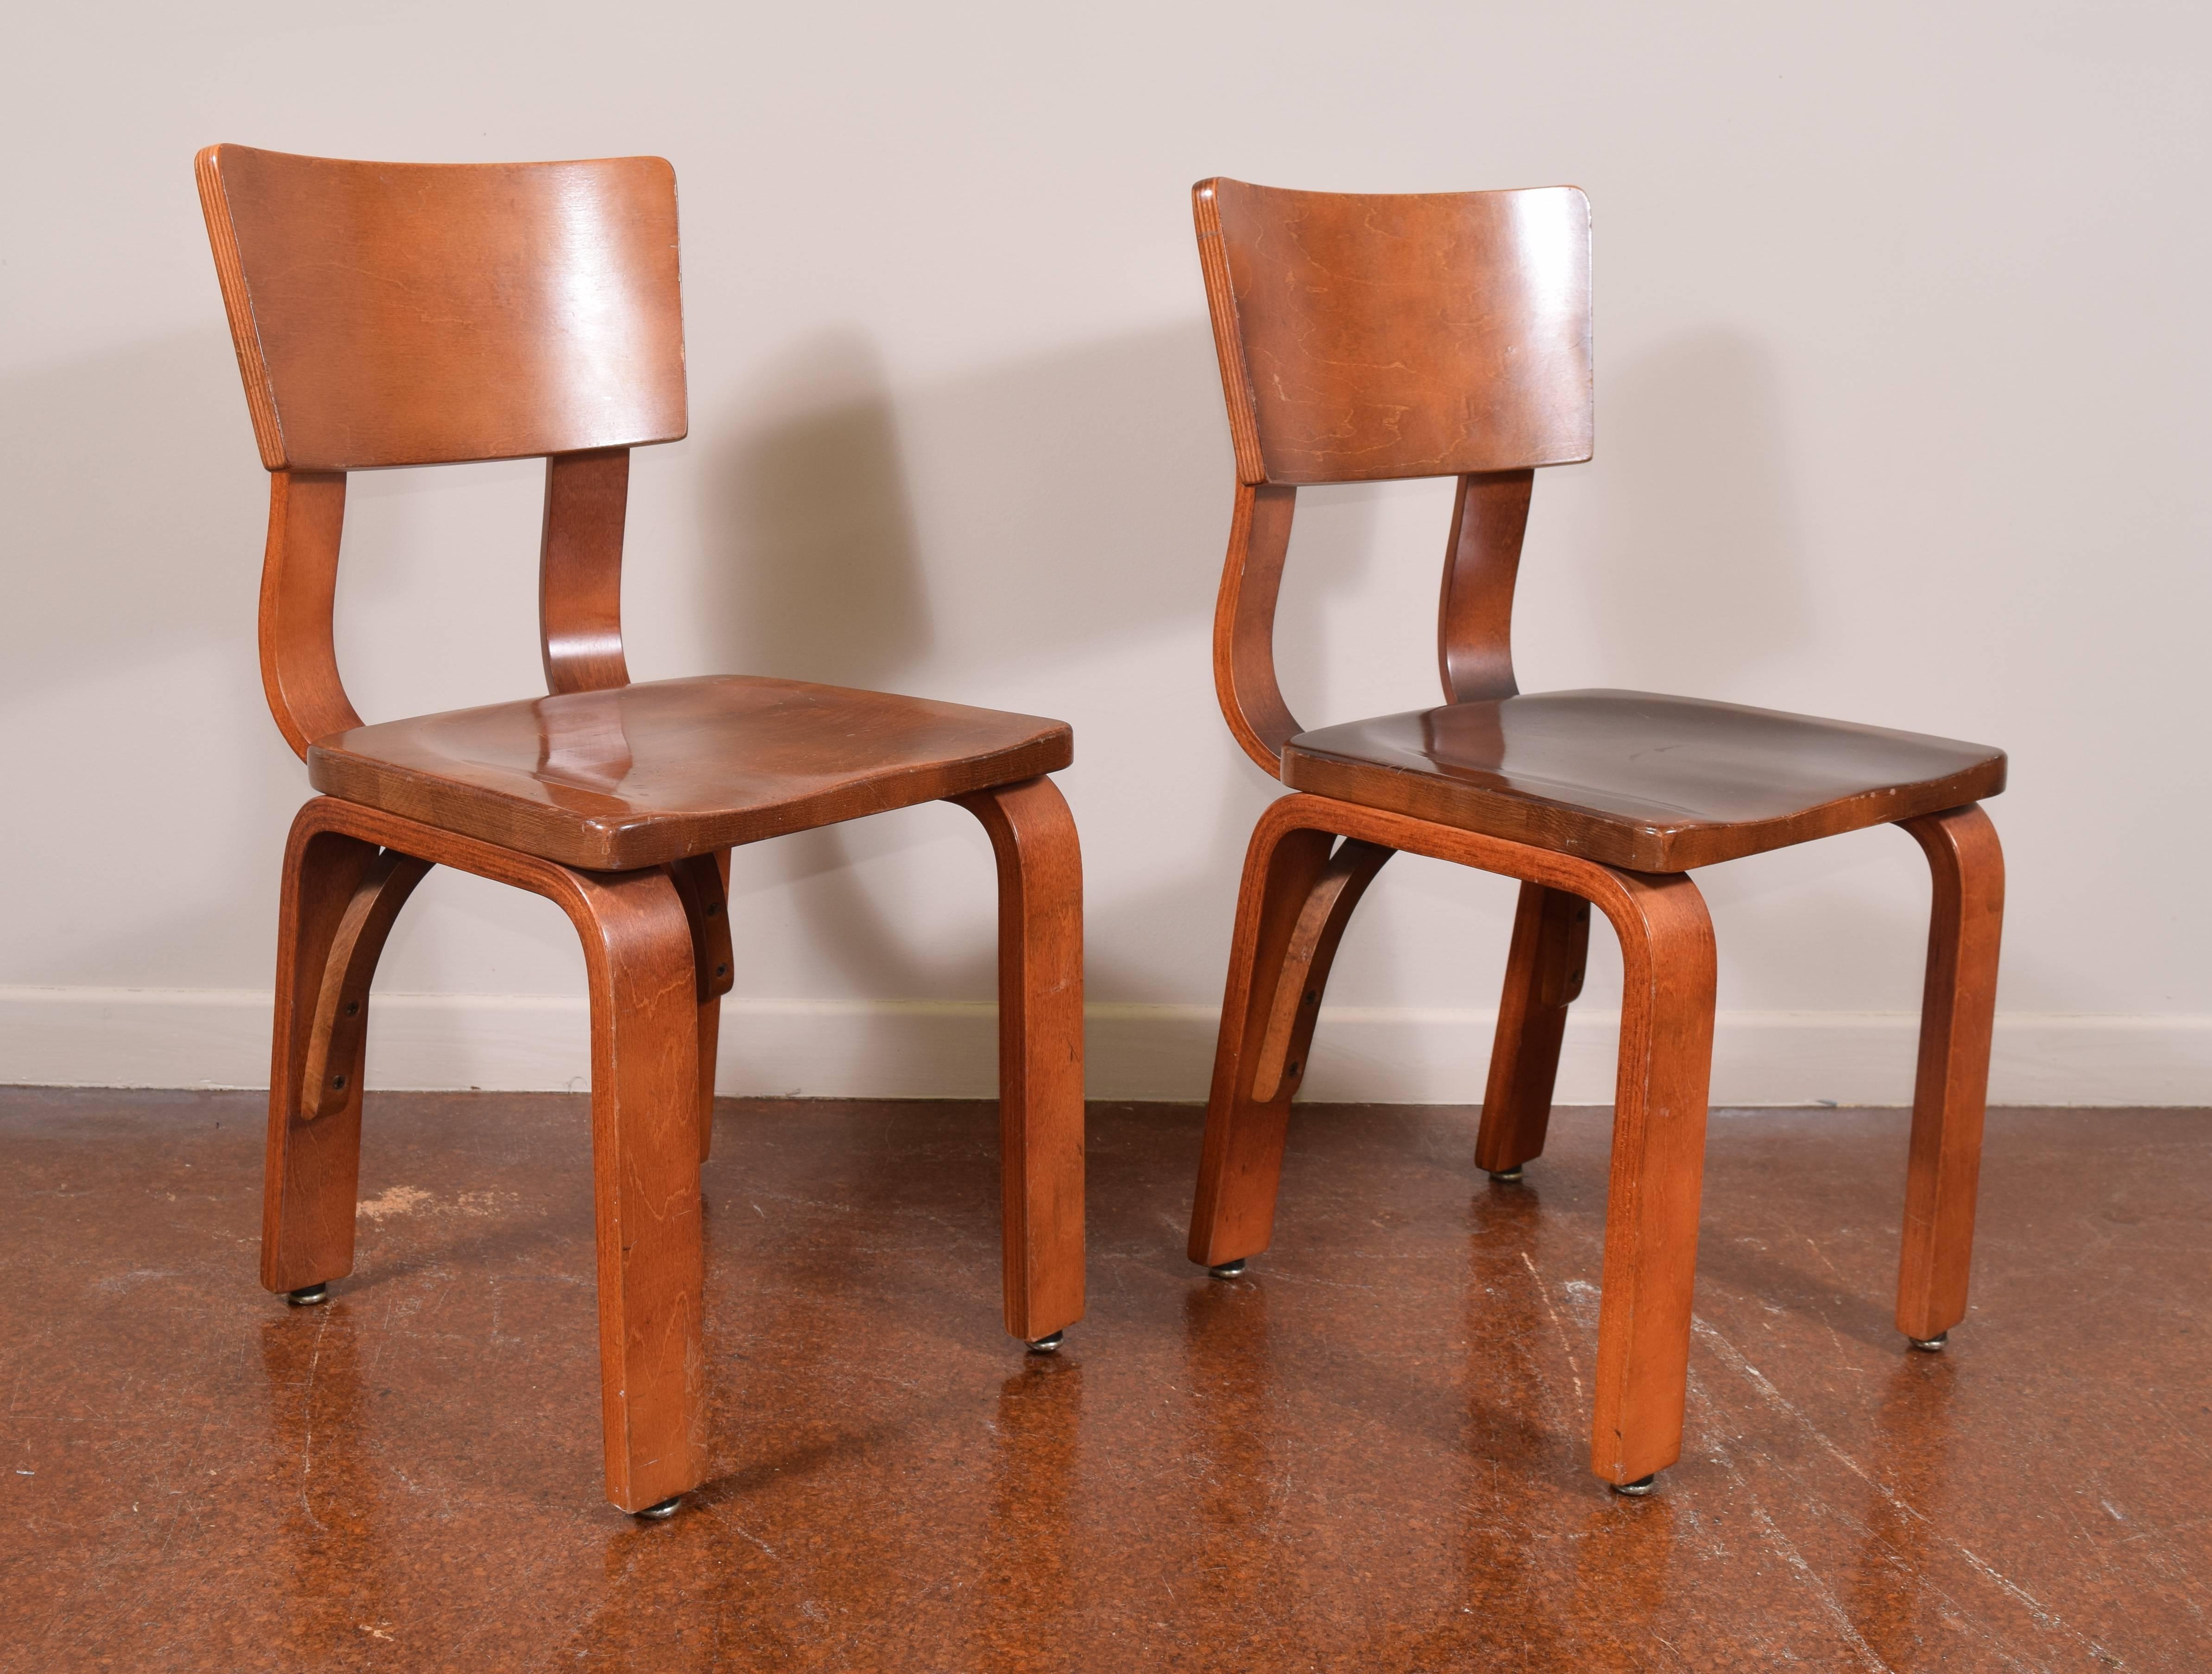 Store closing-- last day is 7/31. Offers welcome! Charming pair of sculpted Mid-Century chairs by Thonet. Marked with partial sticker remnant to underside [Thonet Park Avenue].